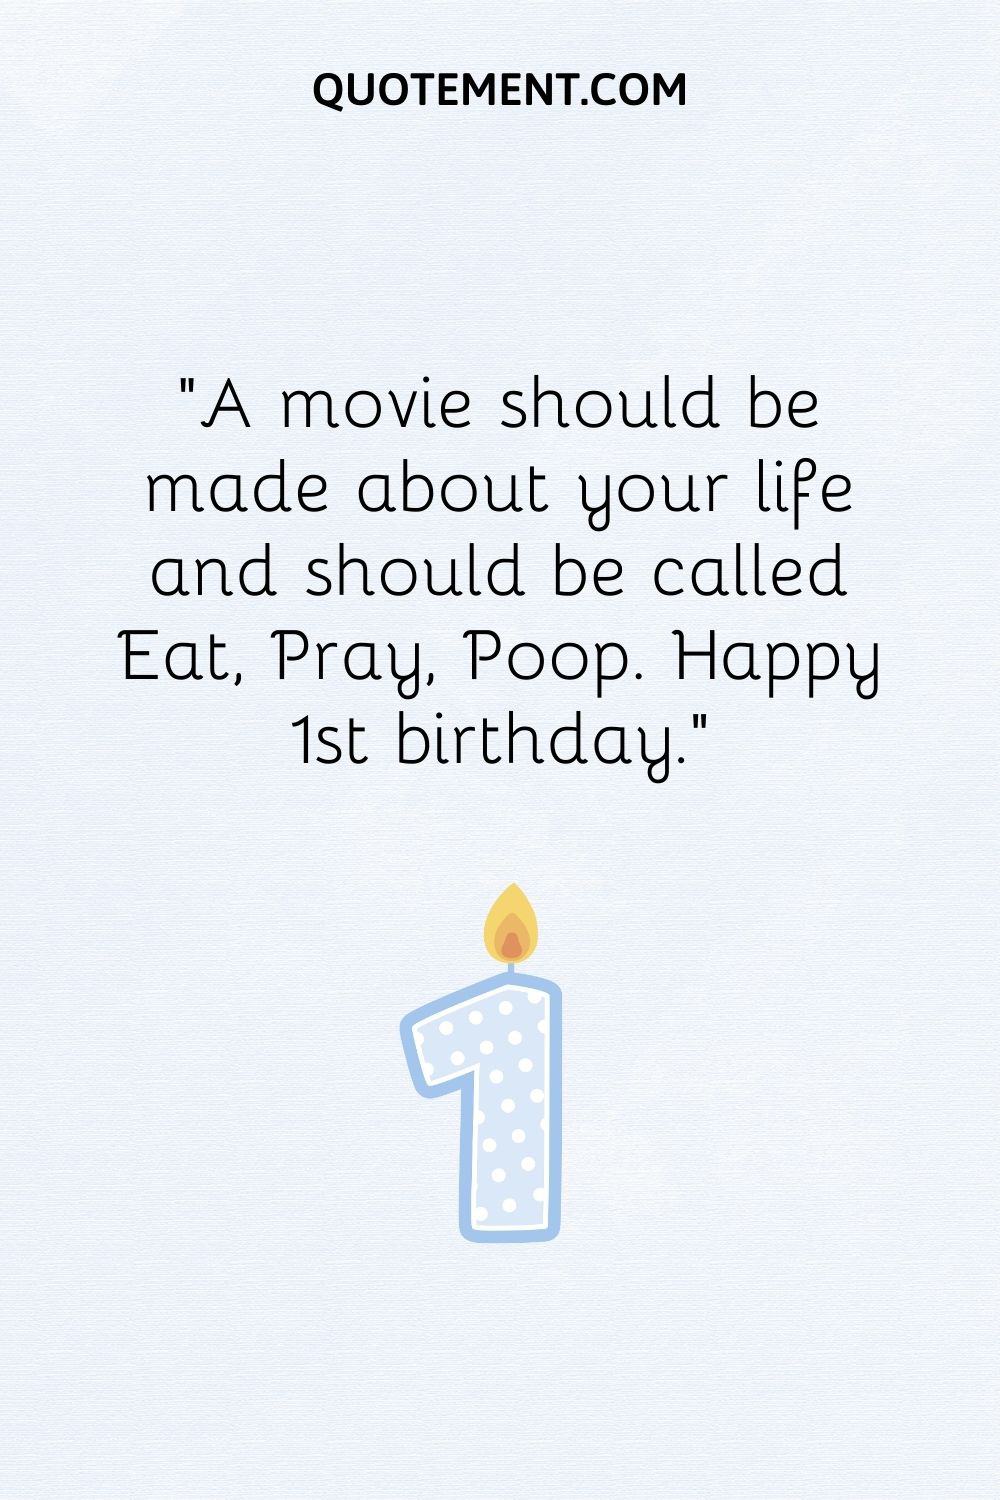 A movie should be made about your life and should be called Eat, Pray, Poop